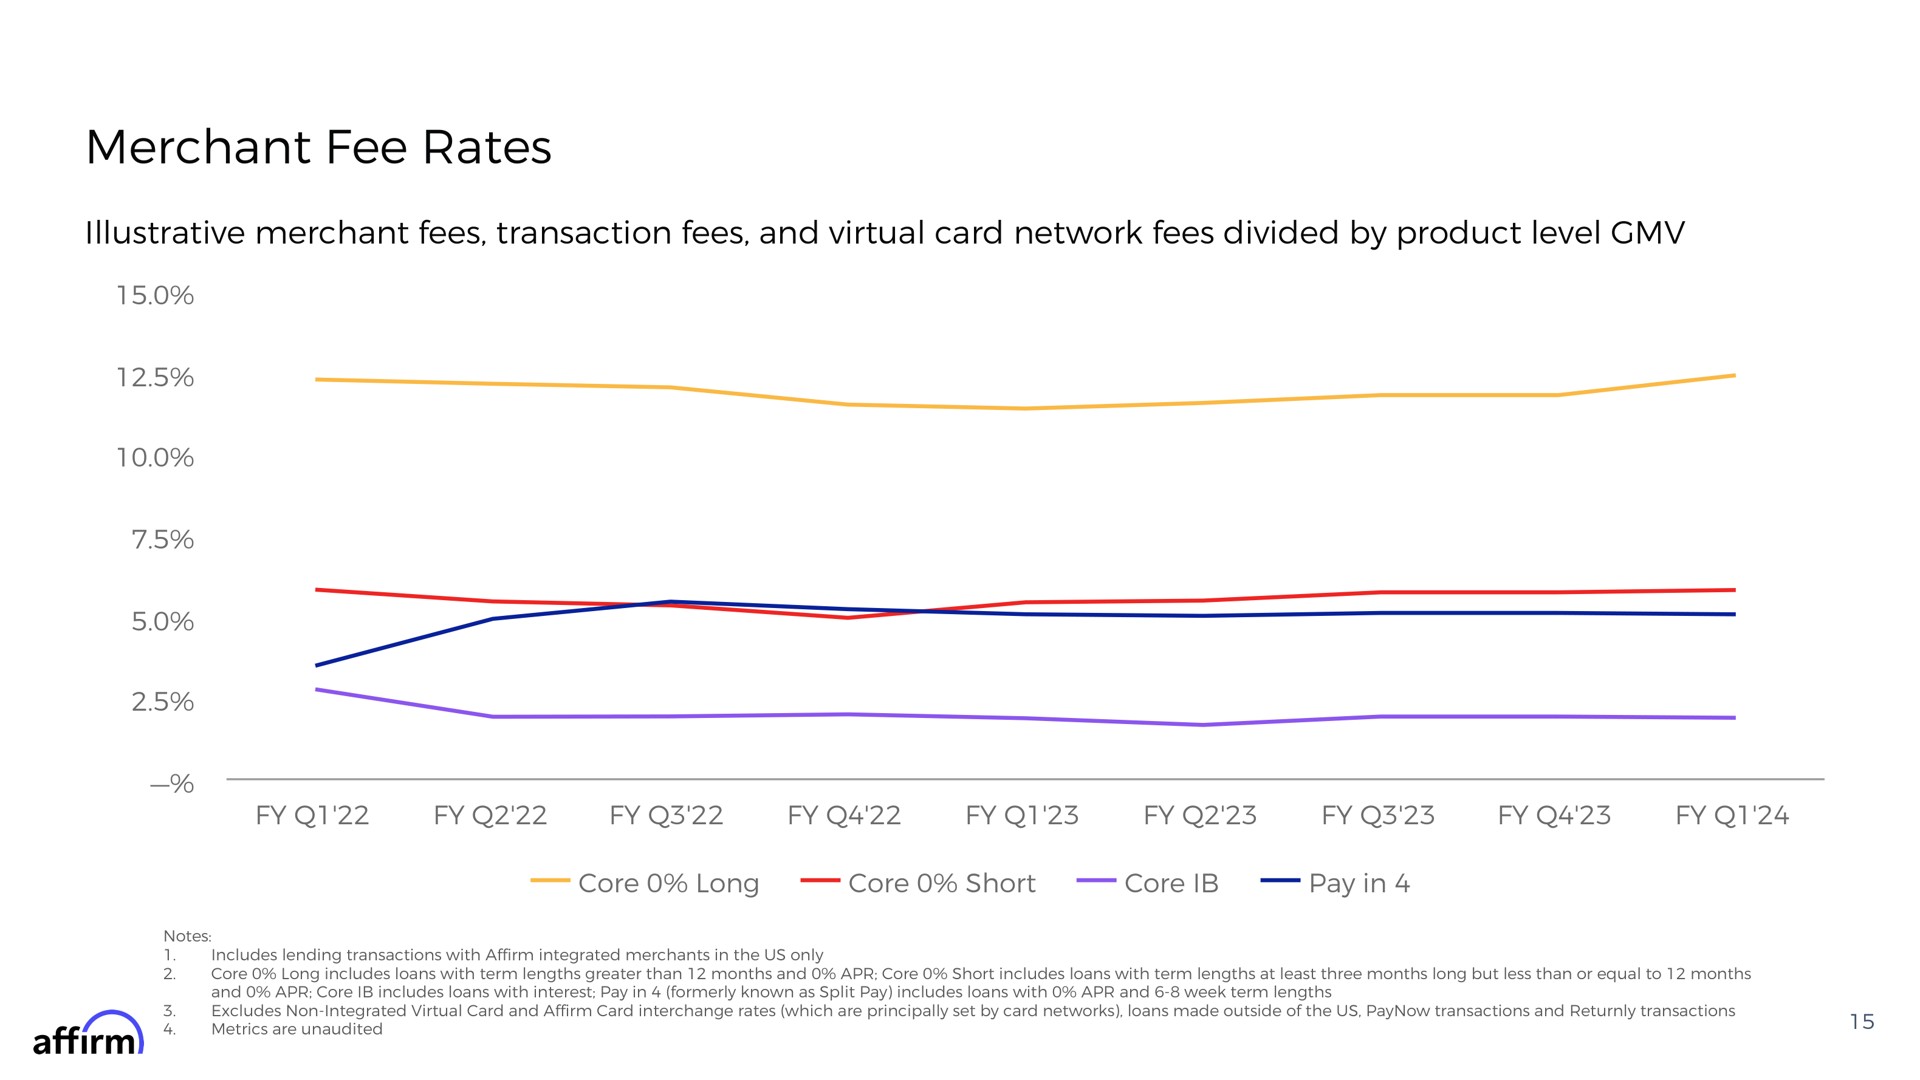 merchant fee rates illustrative merchant fees transaction fees and virtual card network fees divided by product level affirm | Affirm